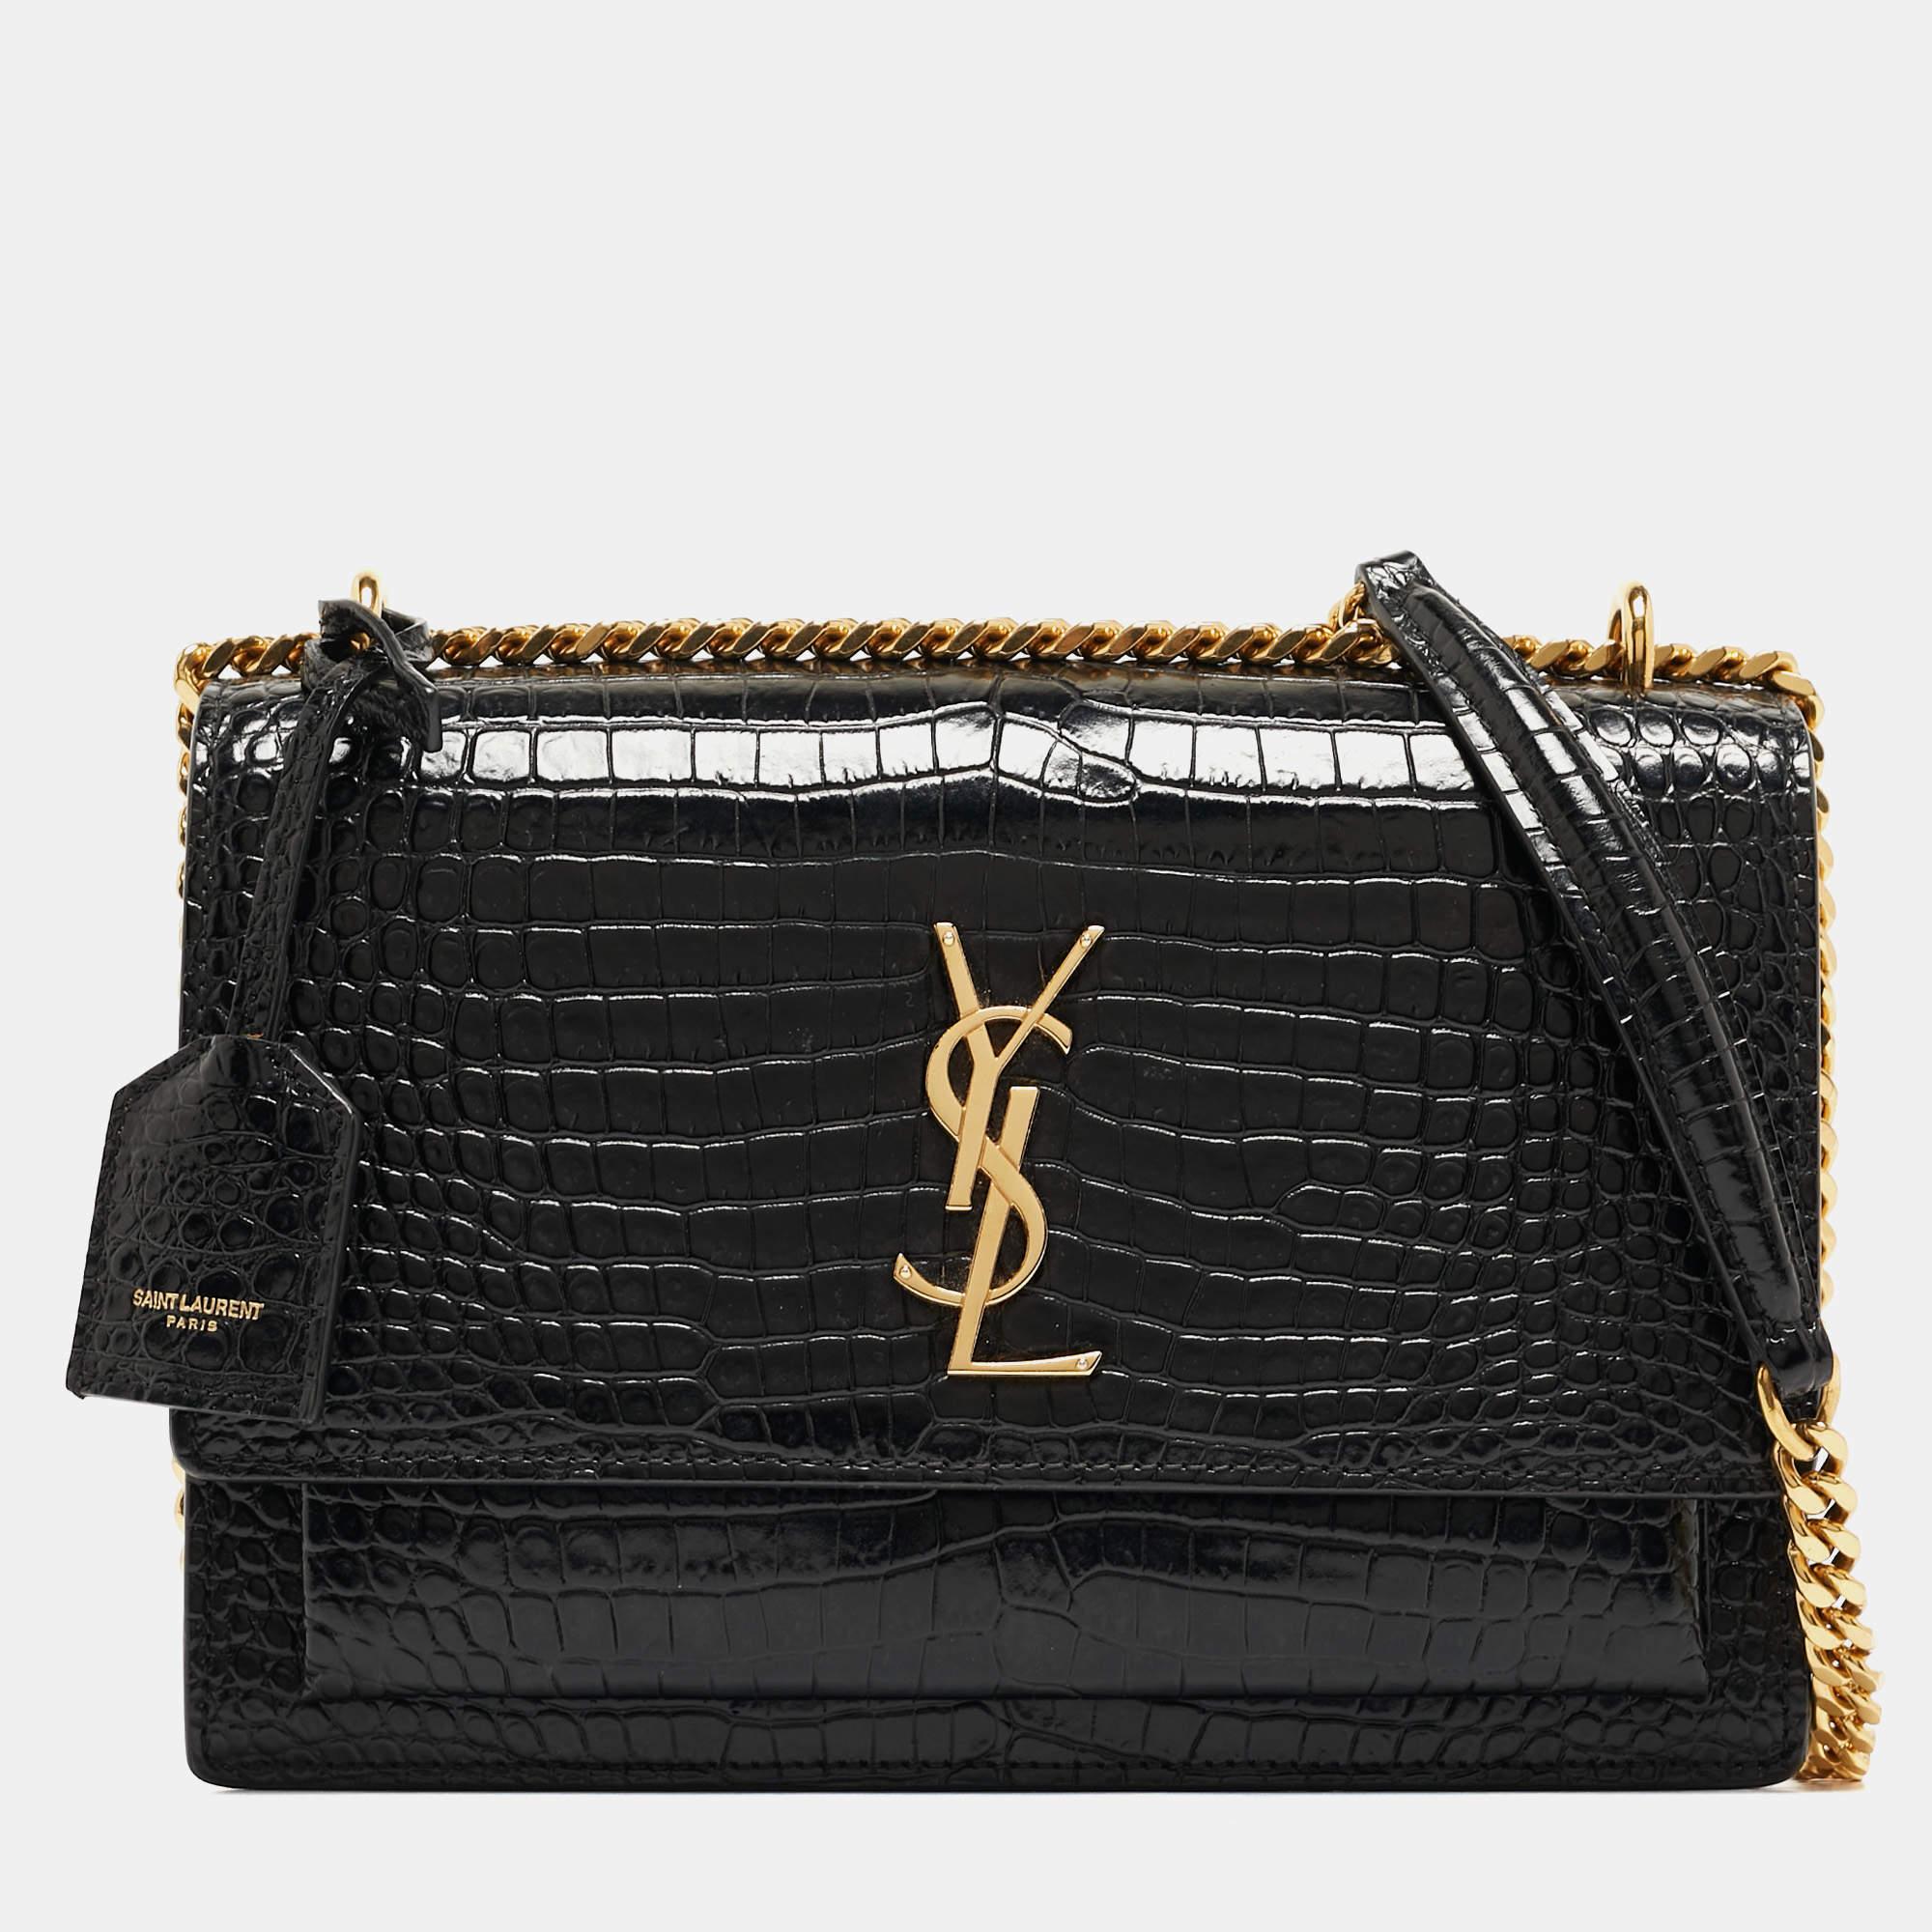 Fall in love with this Sunset bag from Saint Laurent! Crafted from leather, it flaunts the 'YSL' logo on the front flap in gold-tone metal. It has a spacious suede-lined interior that houses pockets. This black beauty is complete with a chain-link